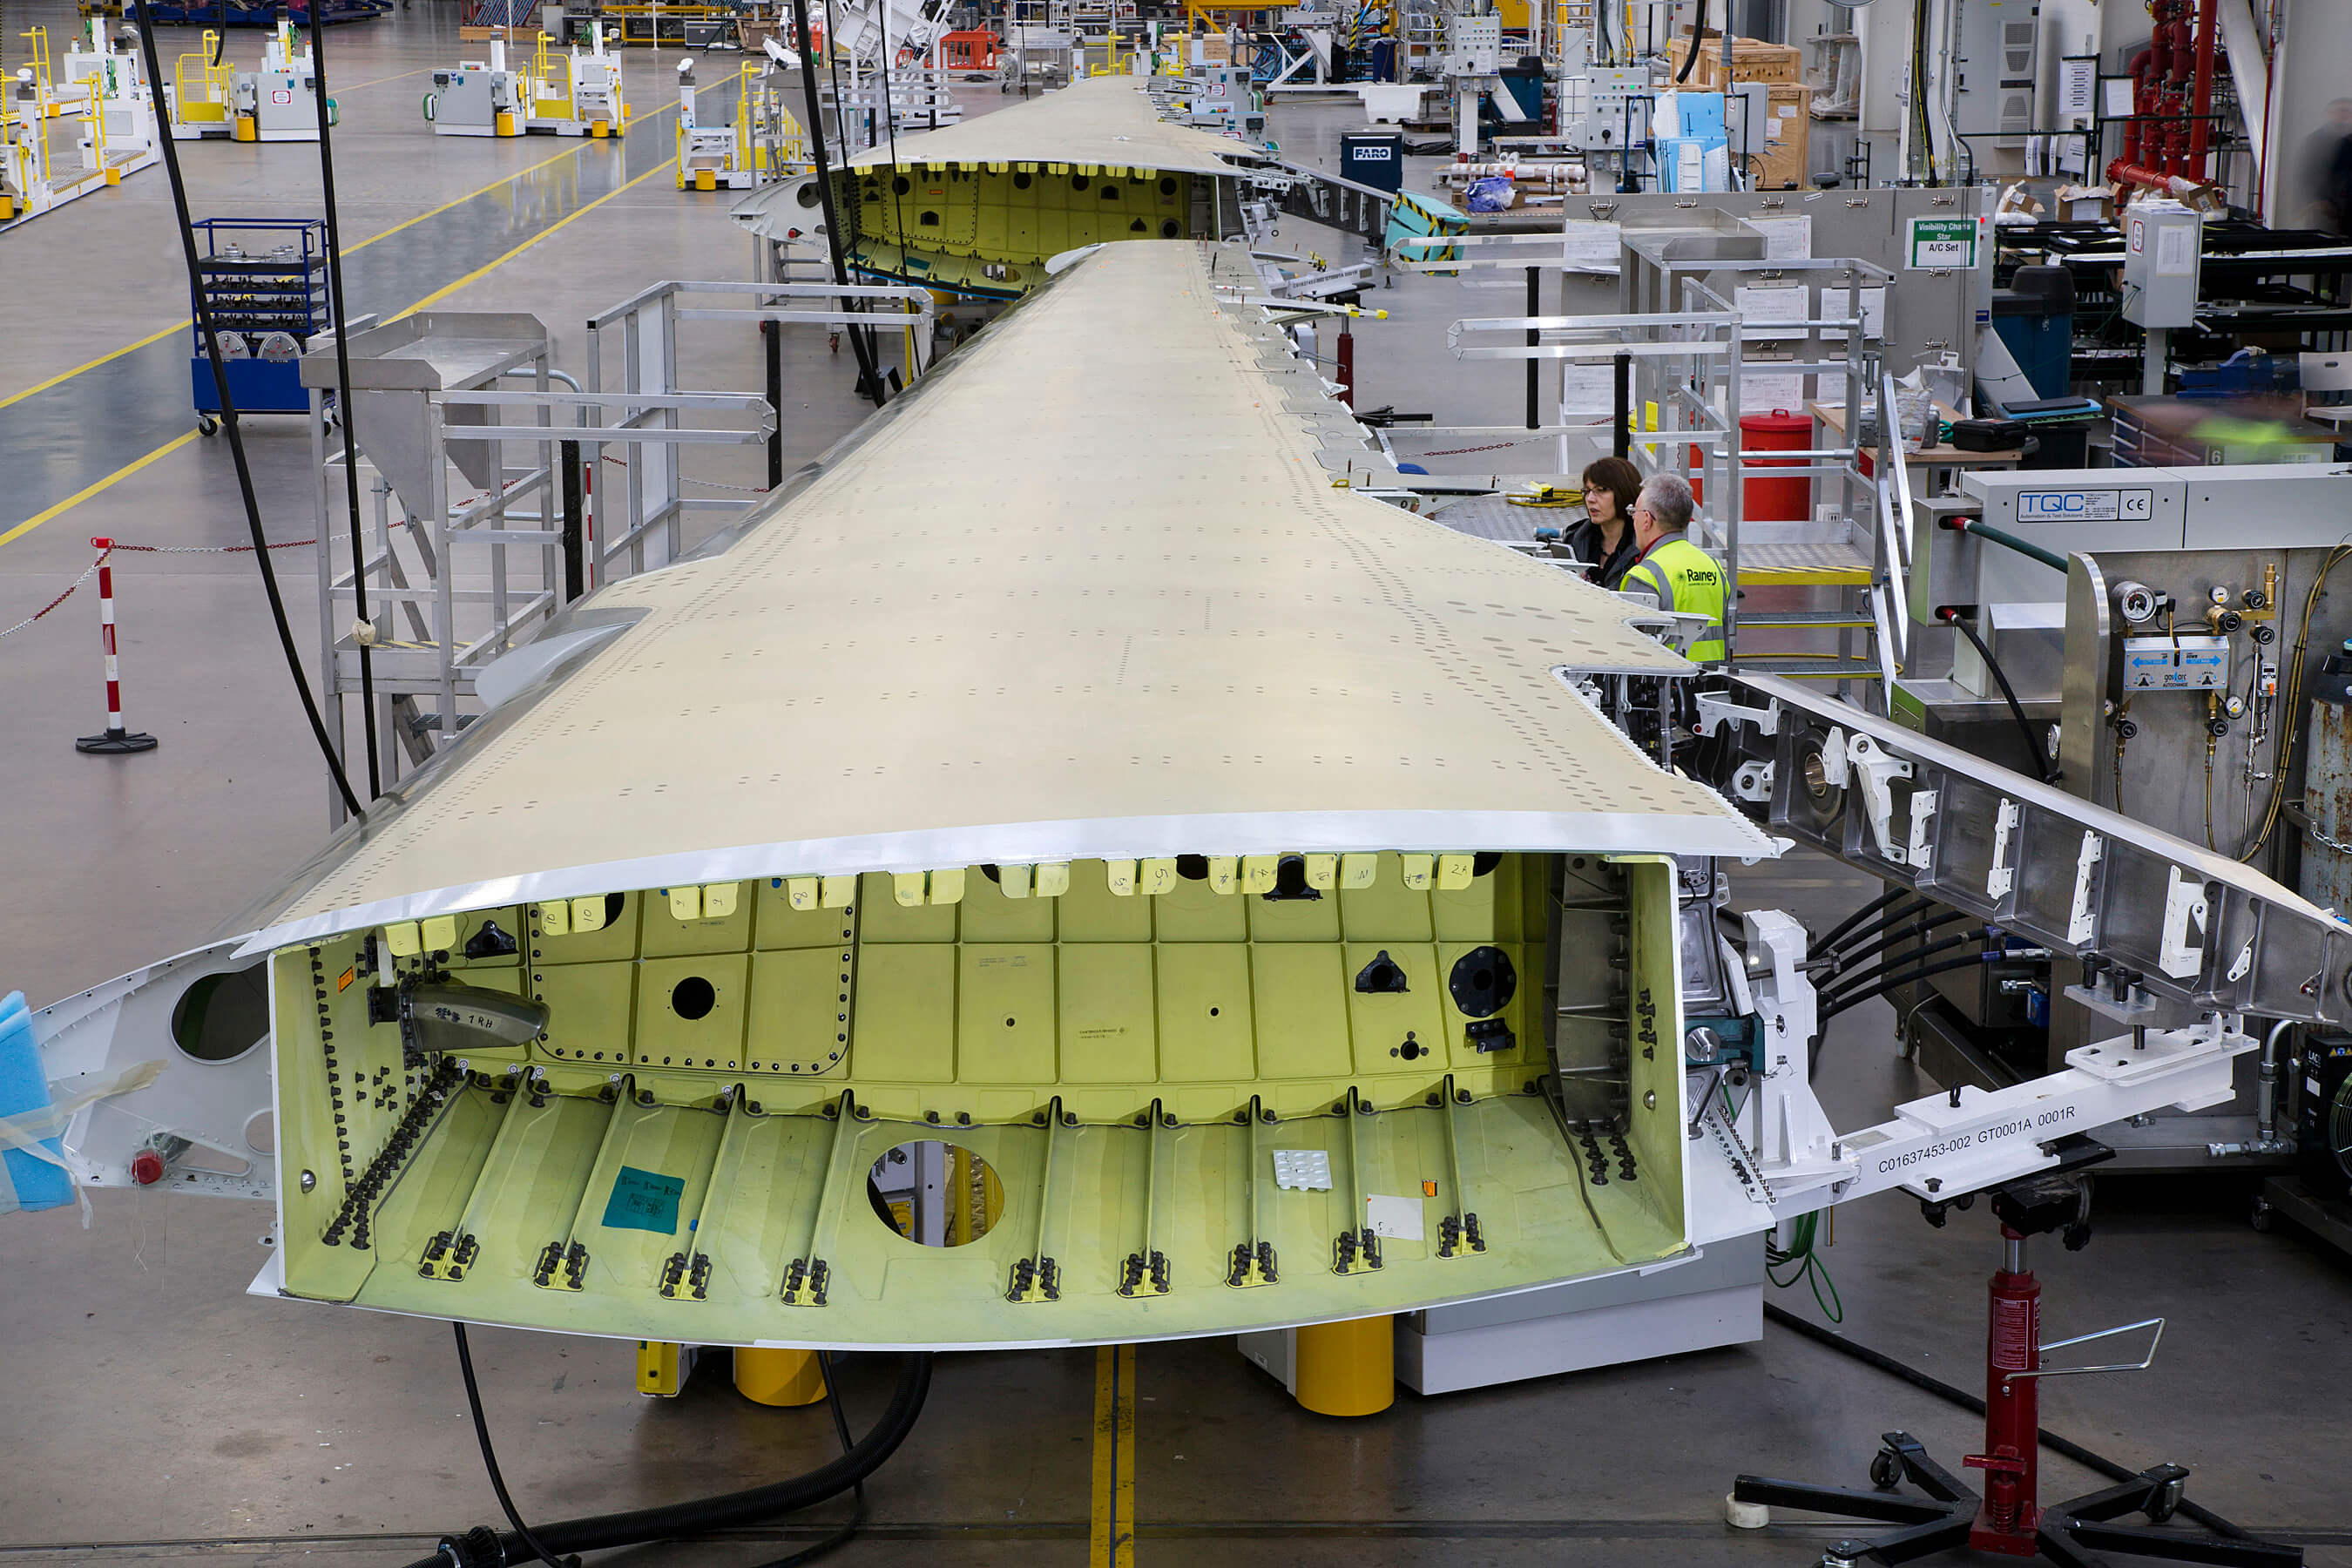 The MacRobert Award winning Bombardiers' resin infused advanced composite aircraft wing reduces fuel burn and waste during manufacture